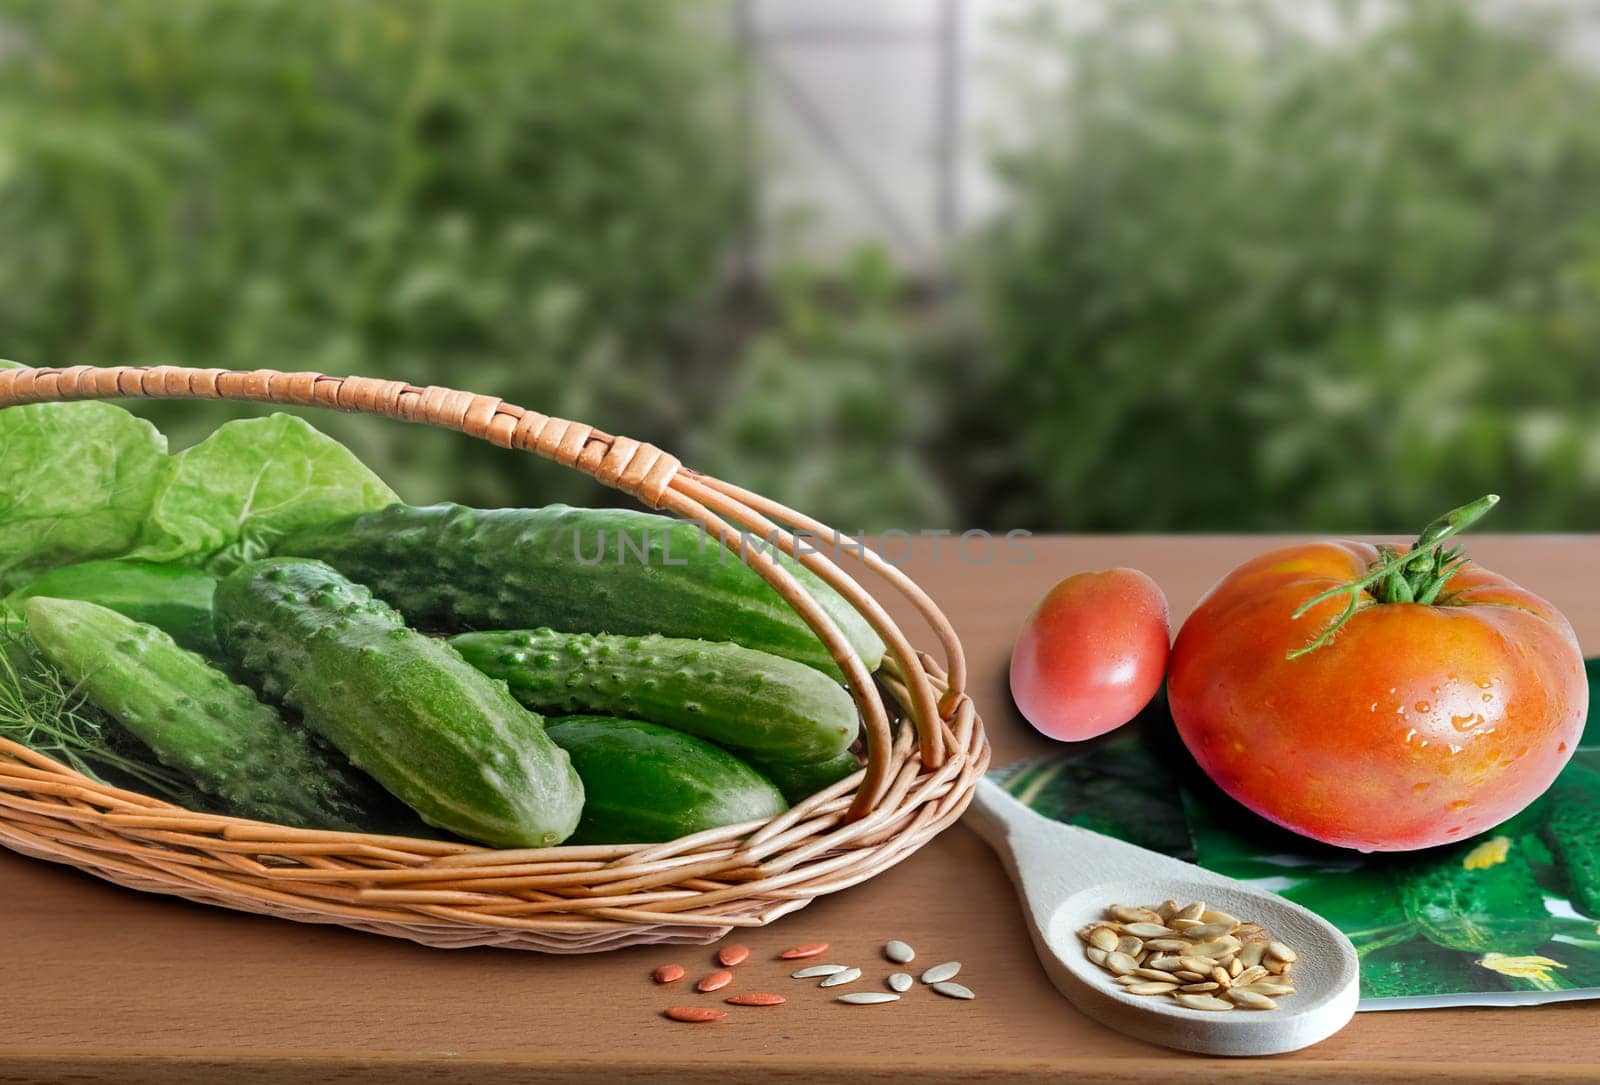 Tomatoes, green cucumbers in the basket and cucumber seeds on a wooden countertop. Presented at the blurred background of the greenhouse.